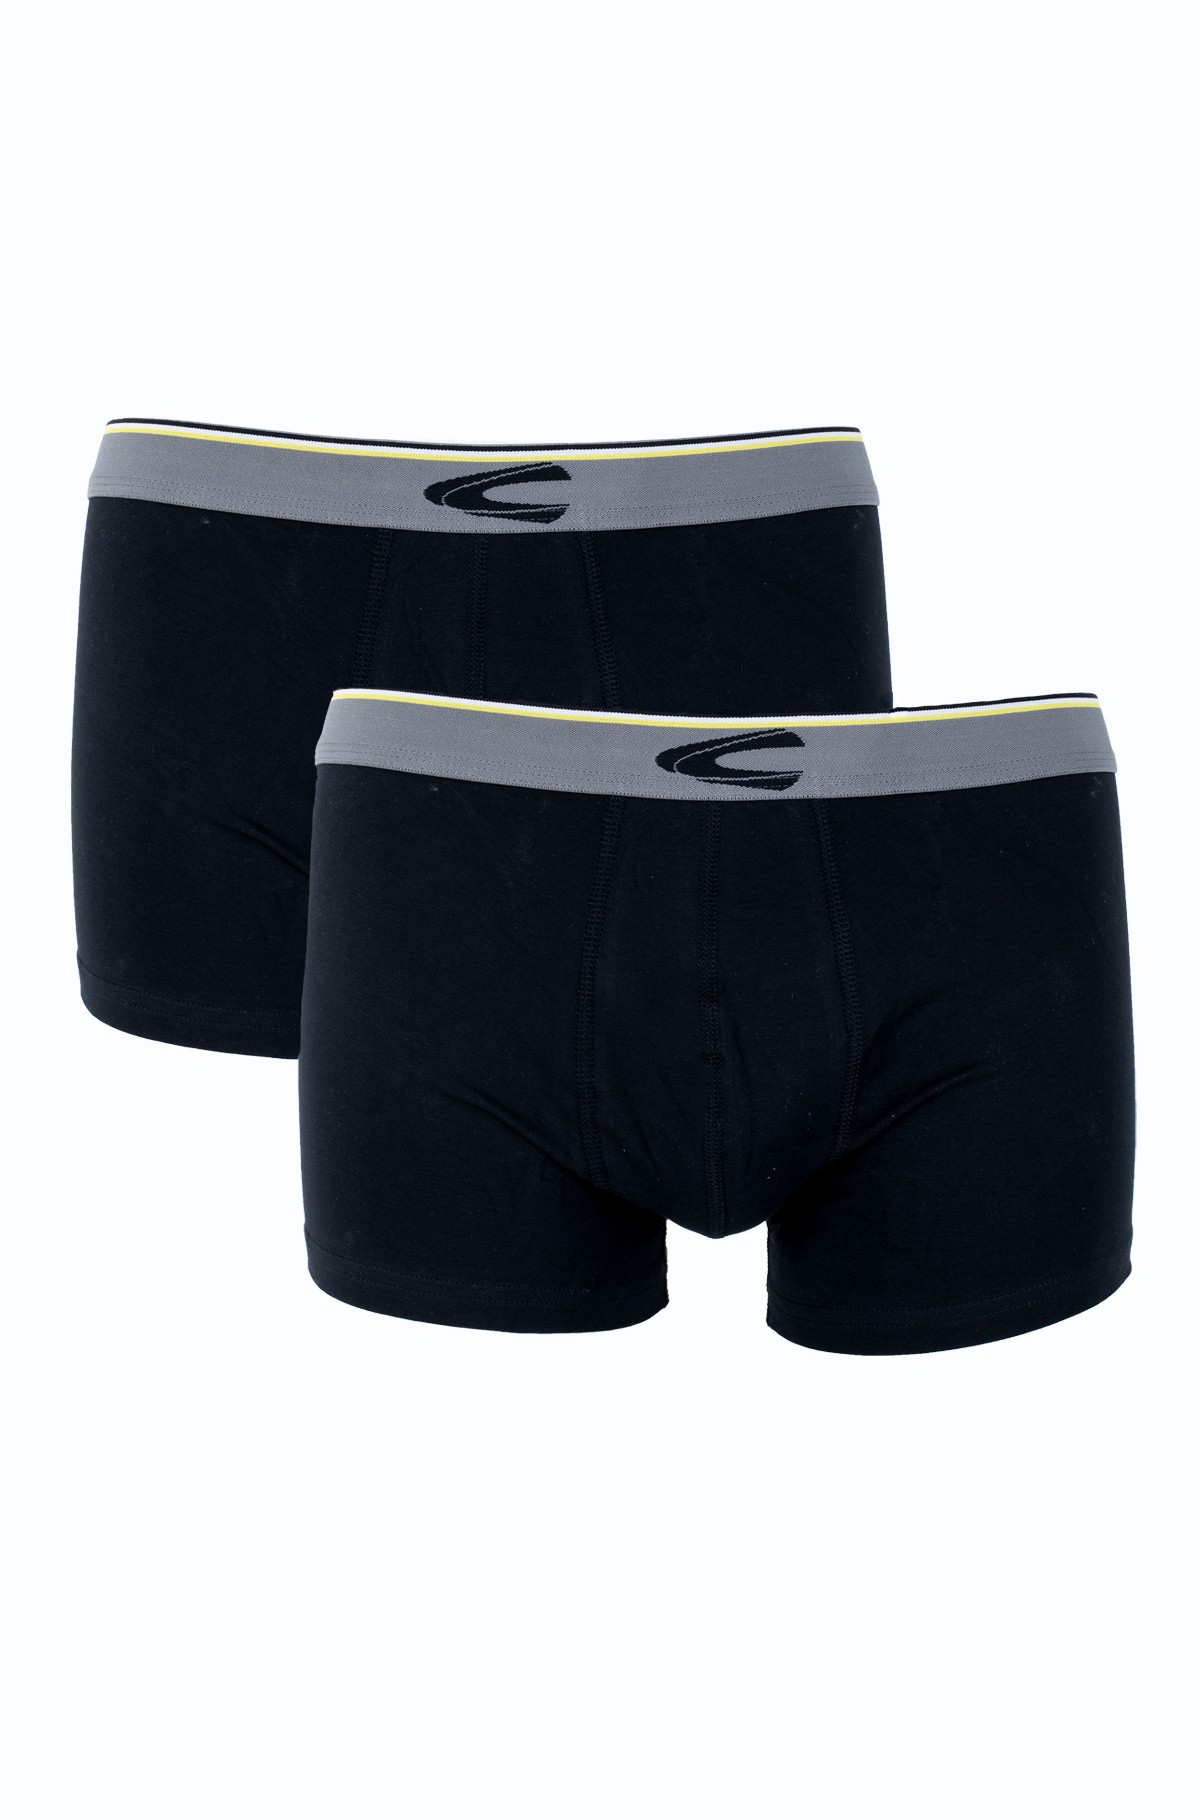 Two pairs of boxers 400610/9A61-full-1